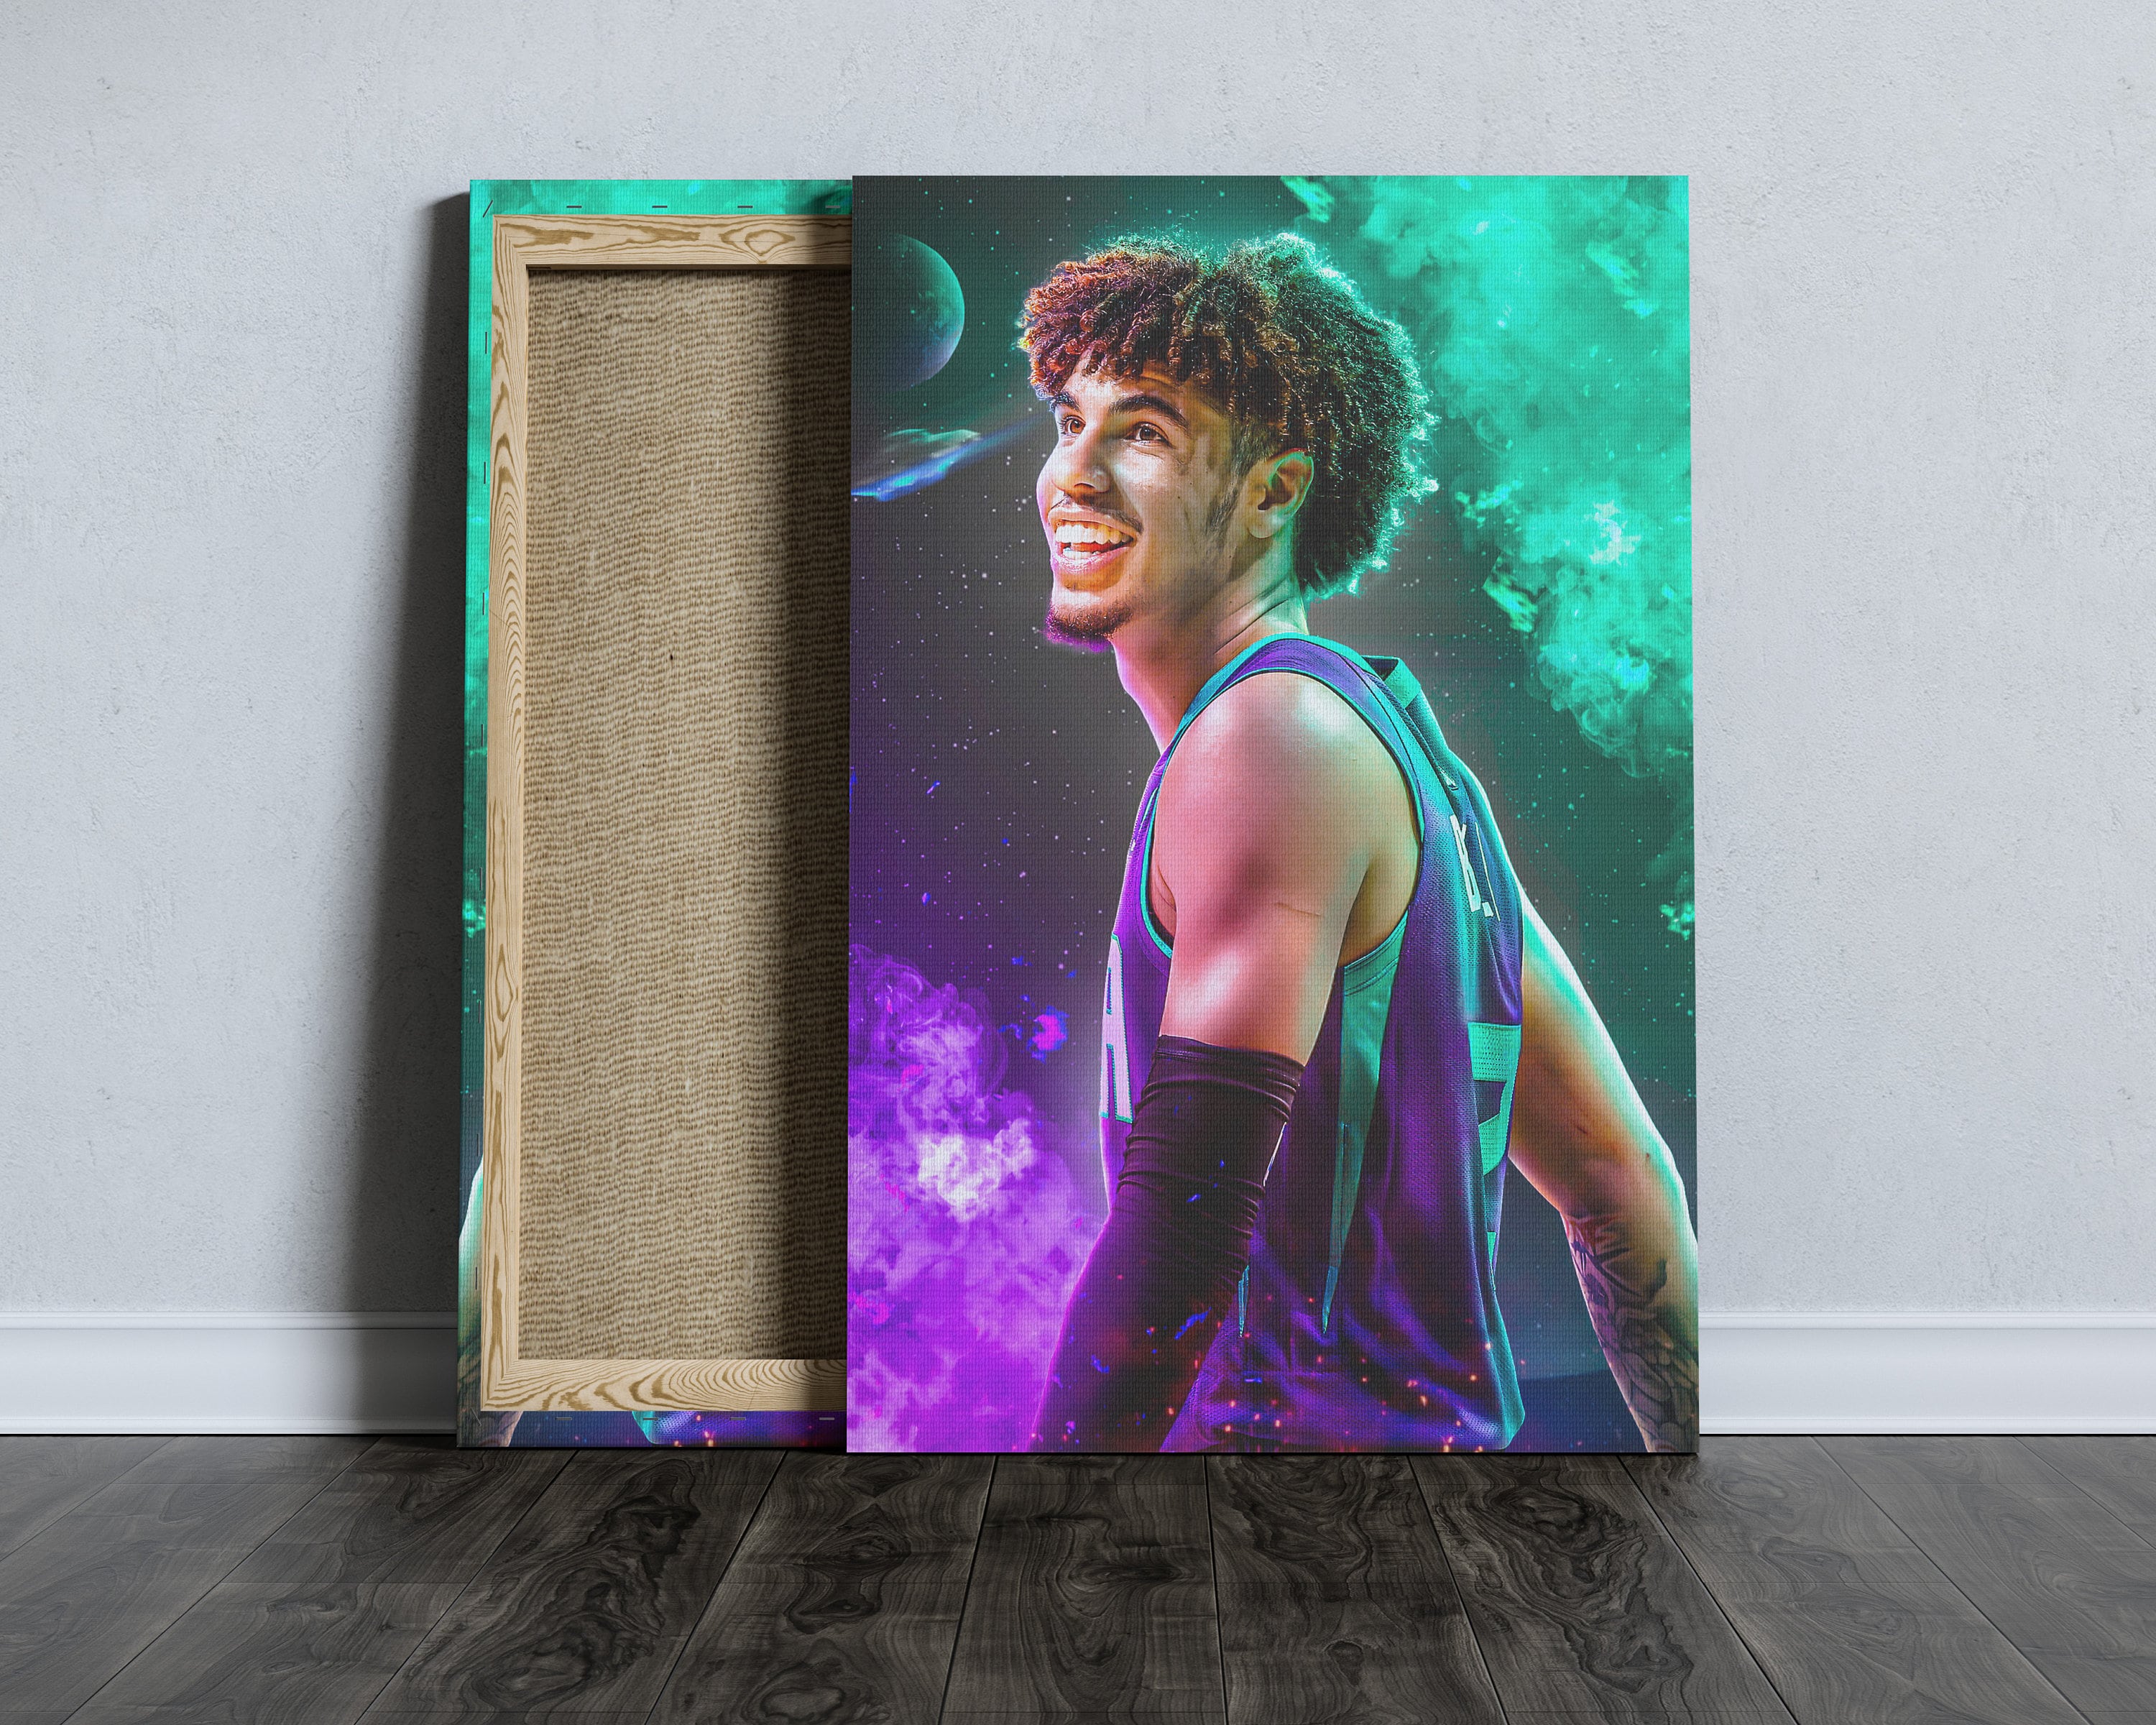  LaMelo LaFrance Ball Poster 1 Wall Art Canvas Print Poster Home  Bathroom Bedroom Office Living Room Decor Canvas Poster Unframe:  16x24inch(40x60cm): Posters & Prints